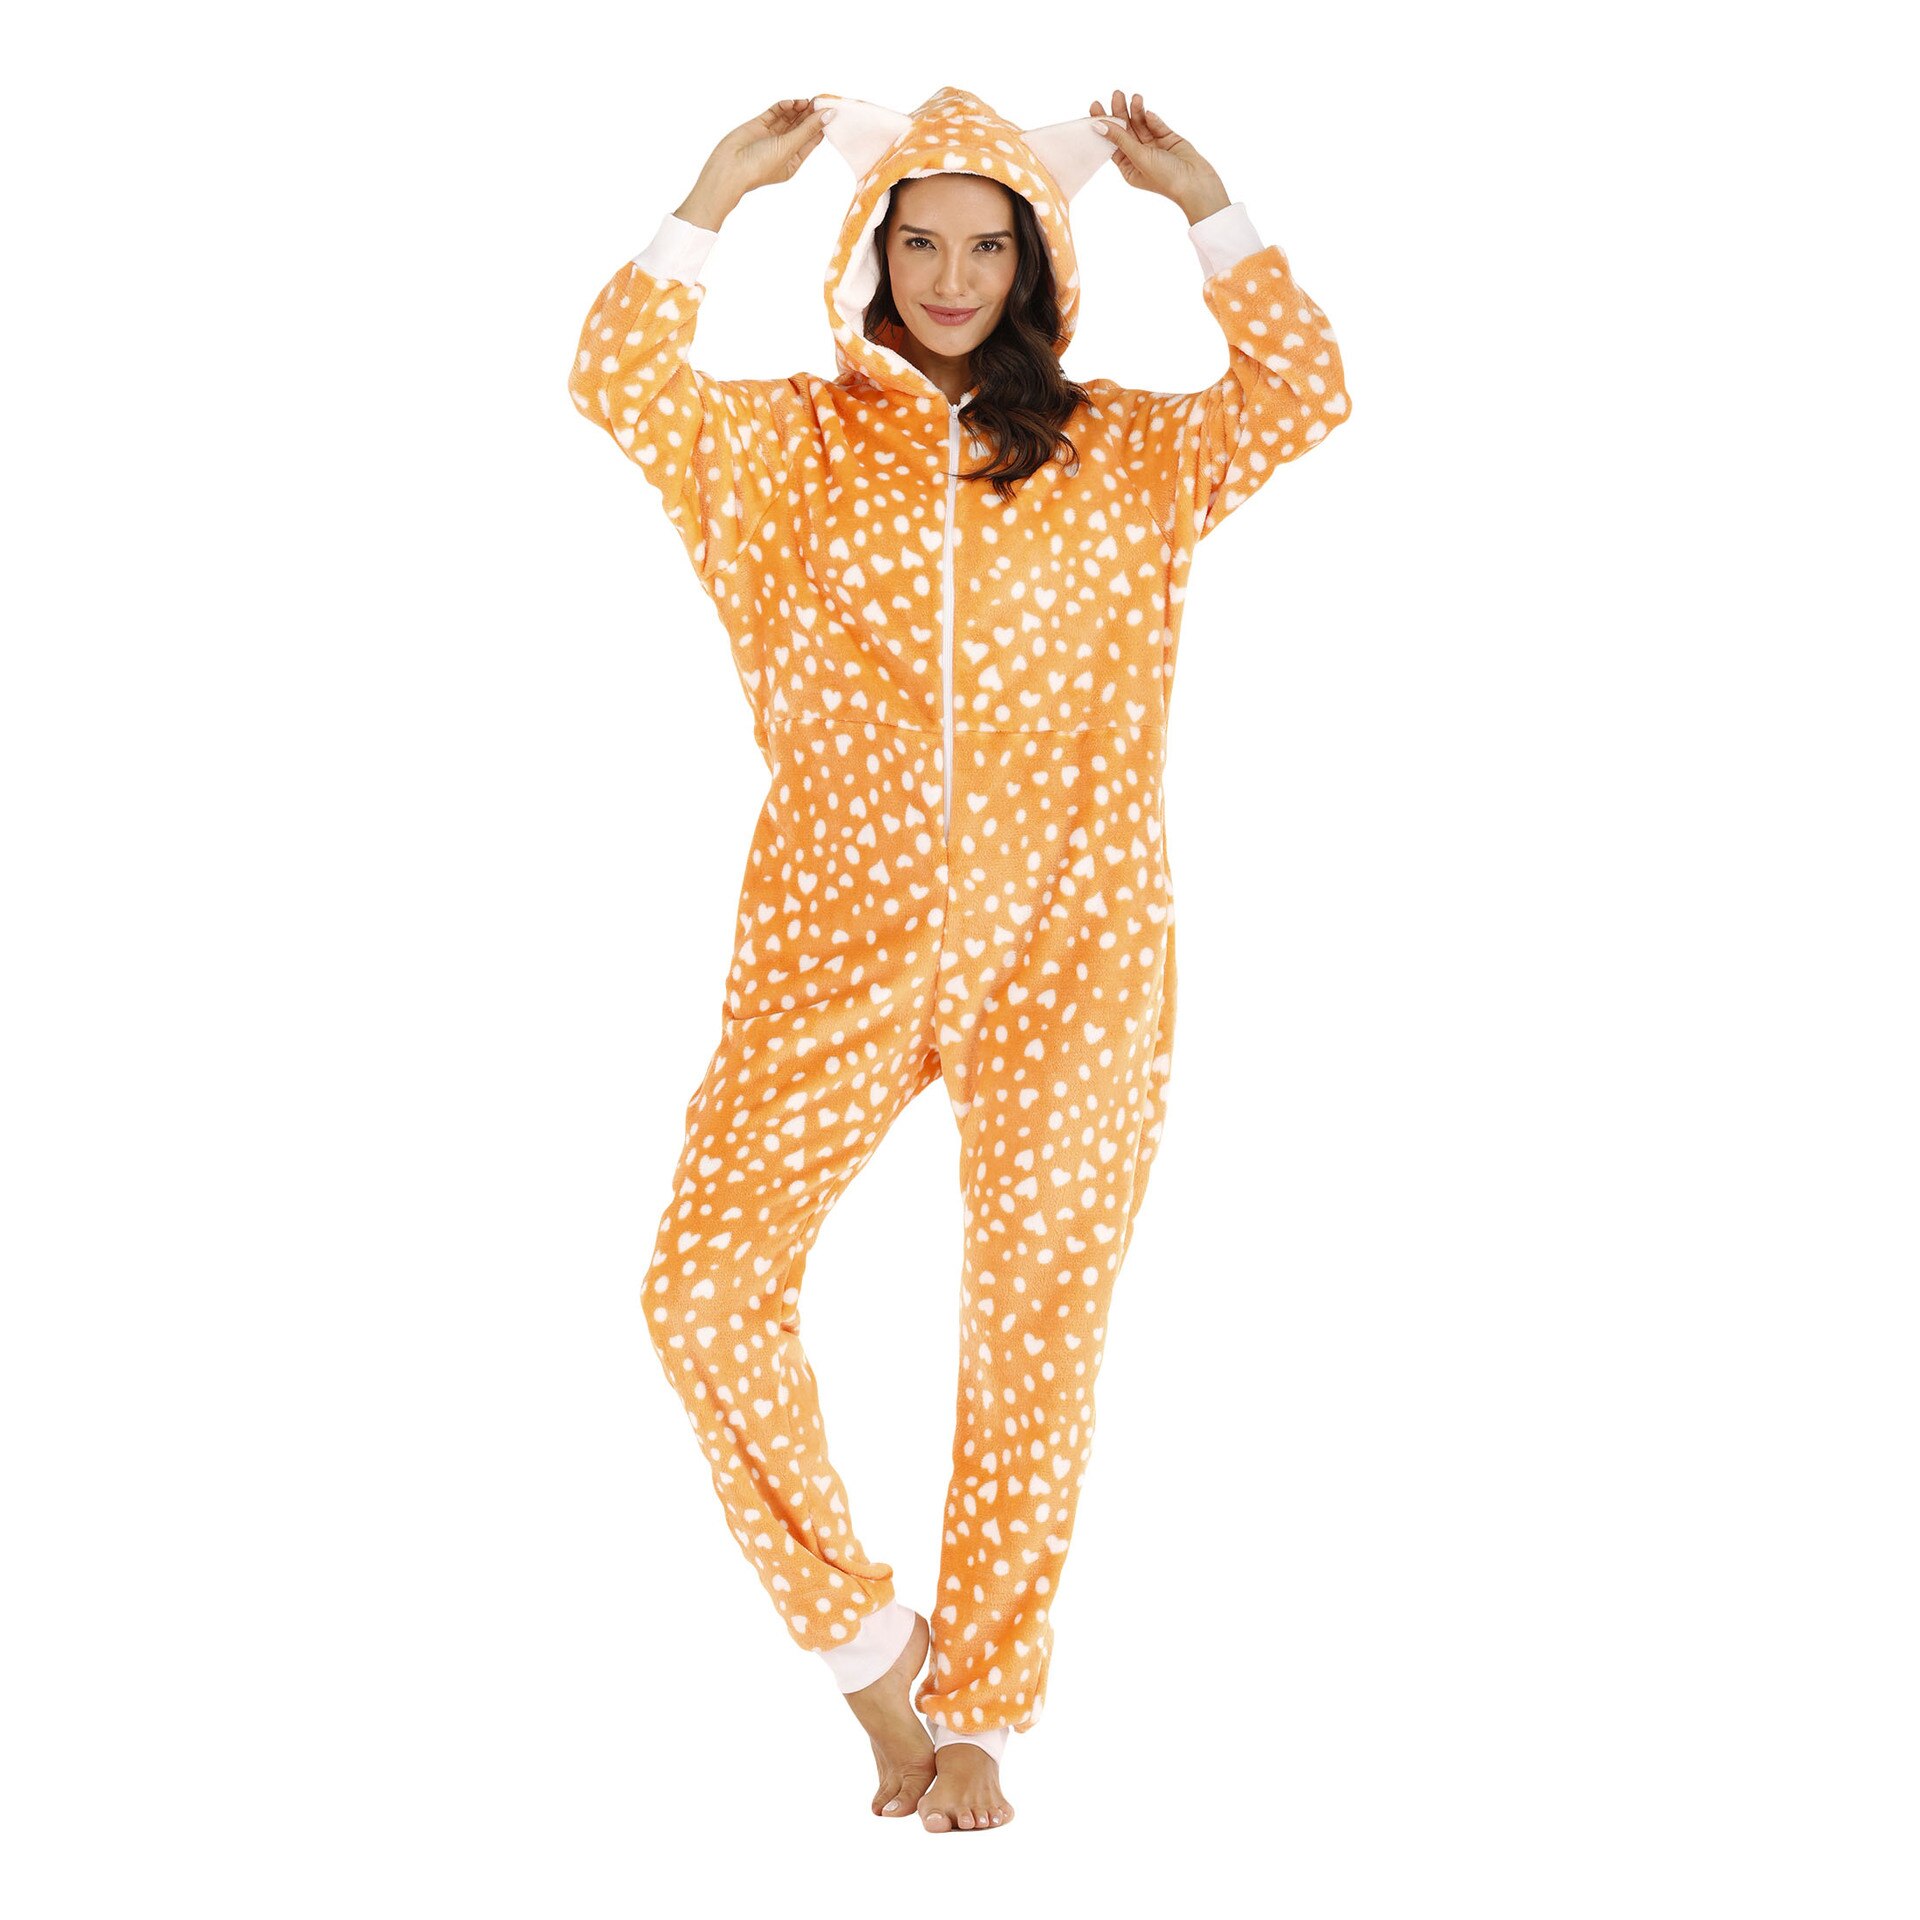 Leopard Jumpsuits Women Stitch Onesie Kingurumi Animal Costumes Adult Casual Festival Party Streetwear Coverall Hooded Pajamas